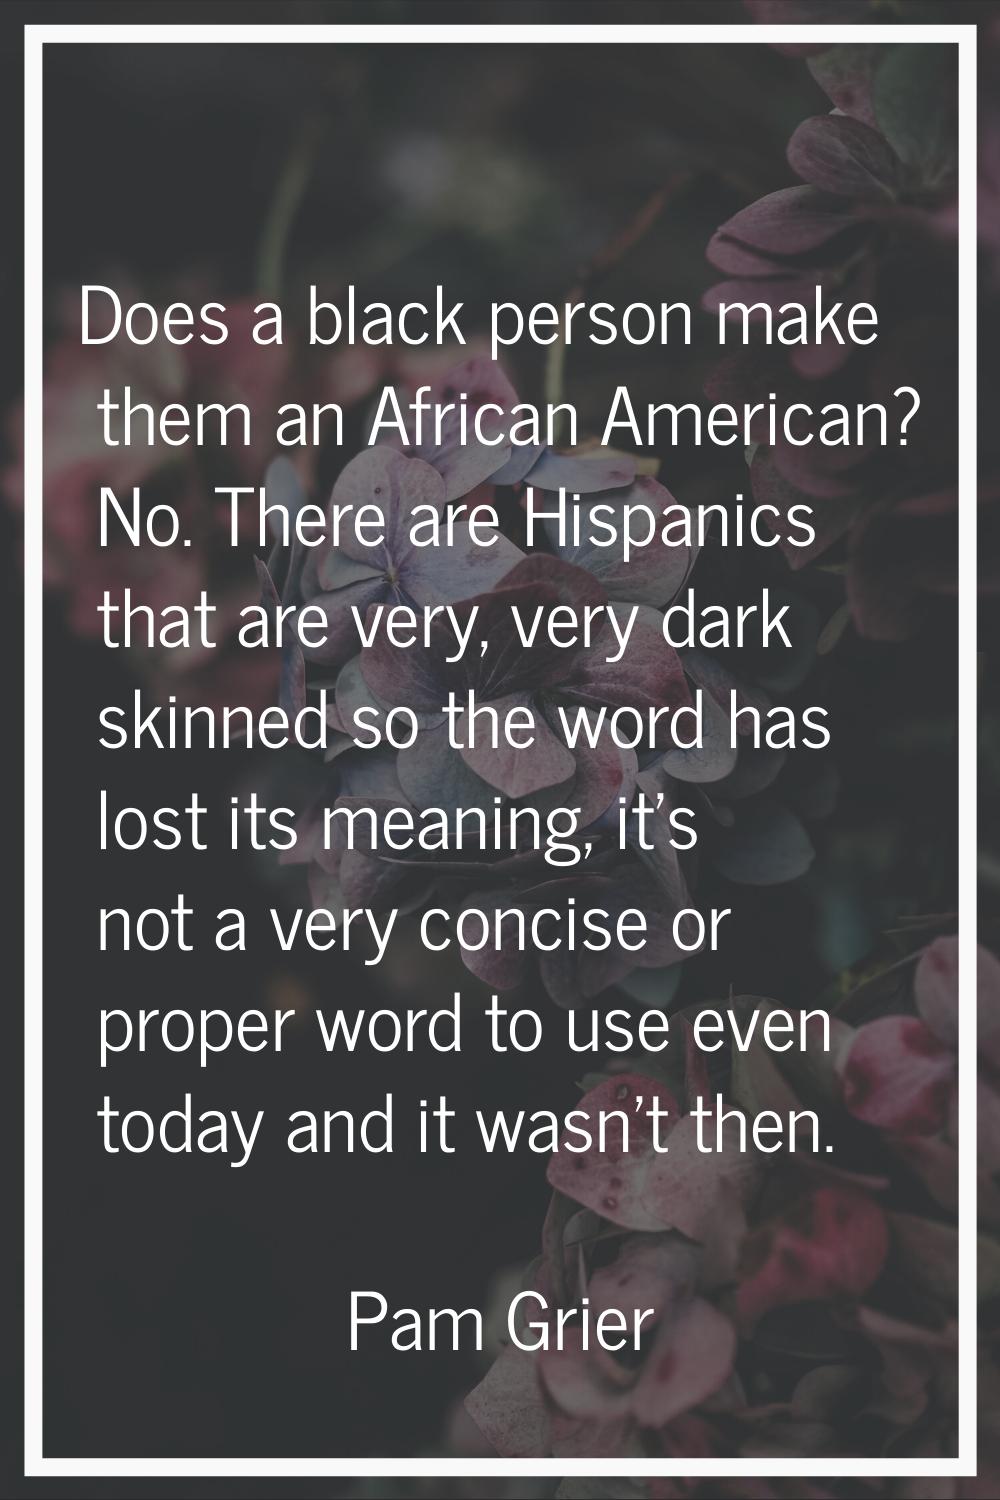 Does a black person make them an African American? No. There are Hispanics that are very, very dark